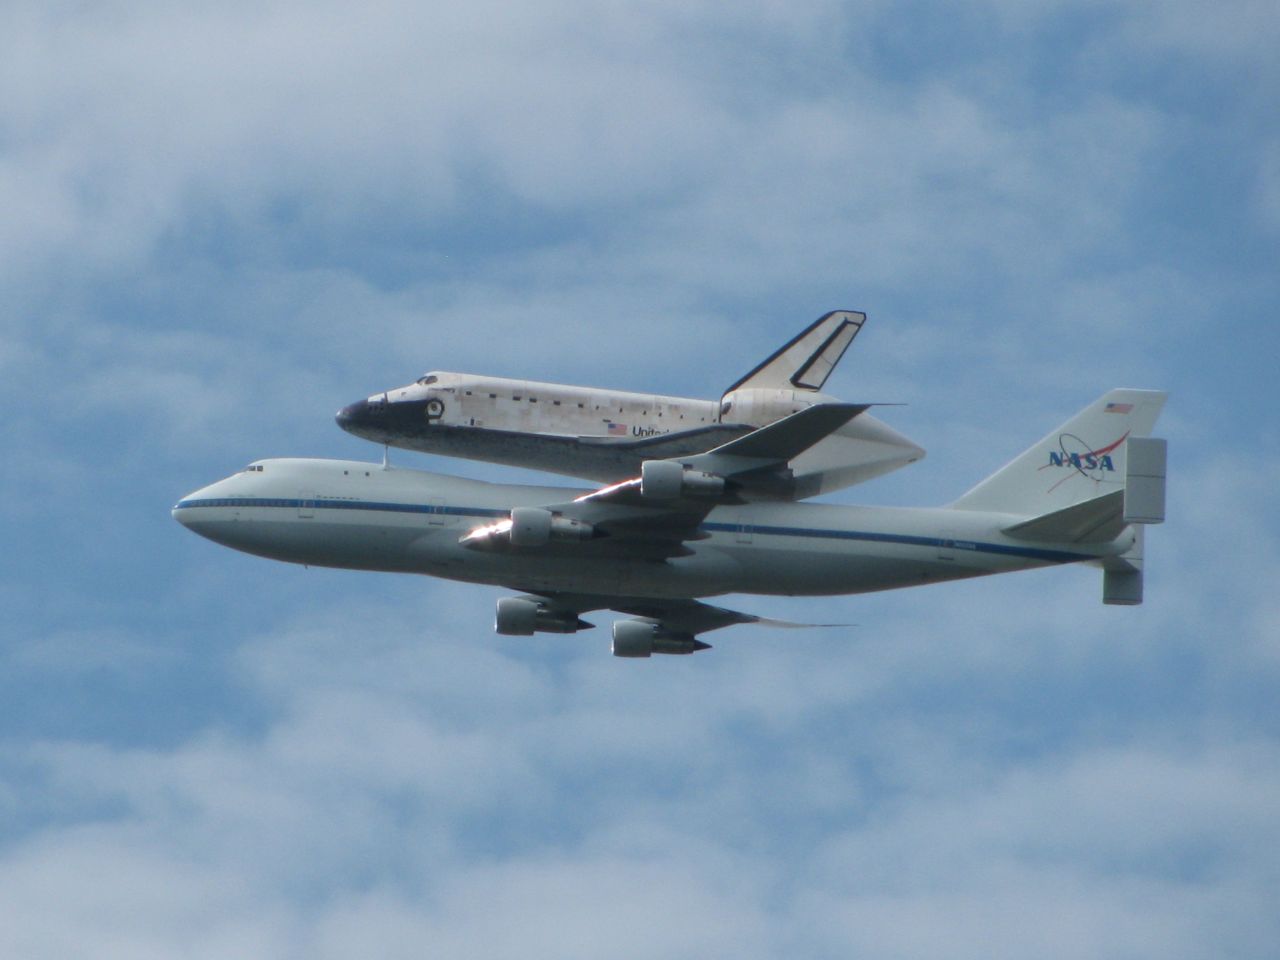 The shuttle rode atop a specially modified 747 from Kennedy Space Center in Florida to Dulles Airport near Washington.